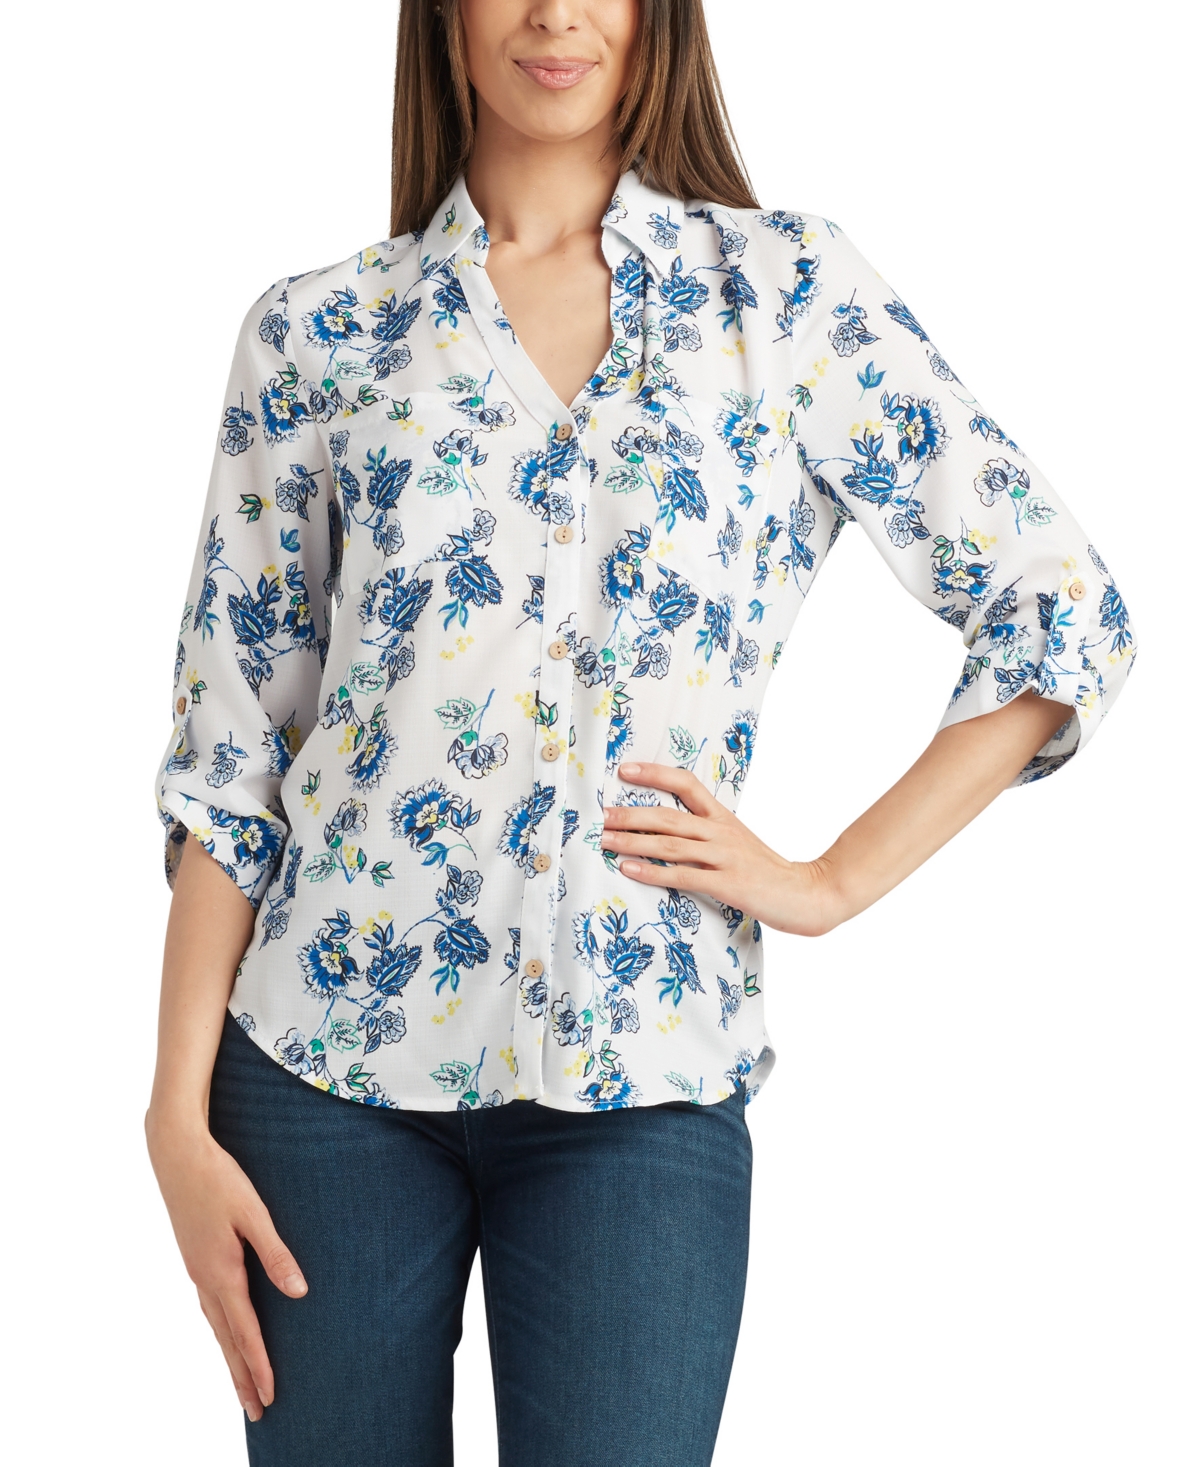 Juniors' Printed Roll-Tab Button-Front Shirt - Blue Floral